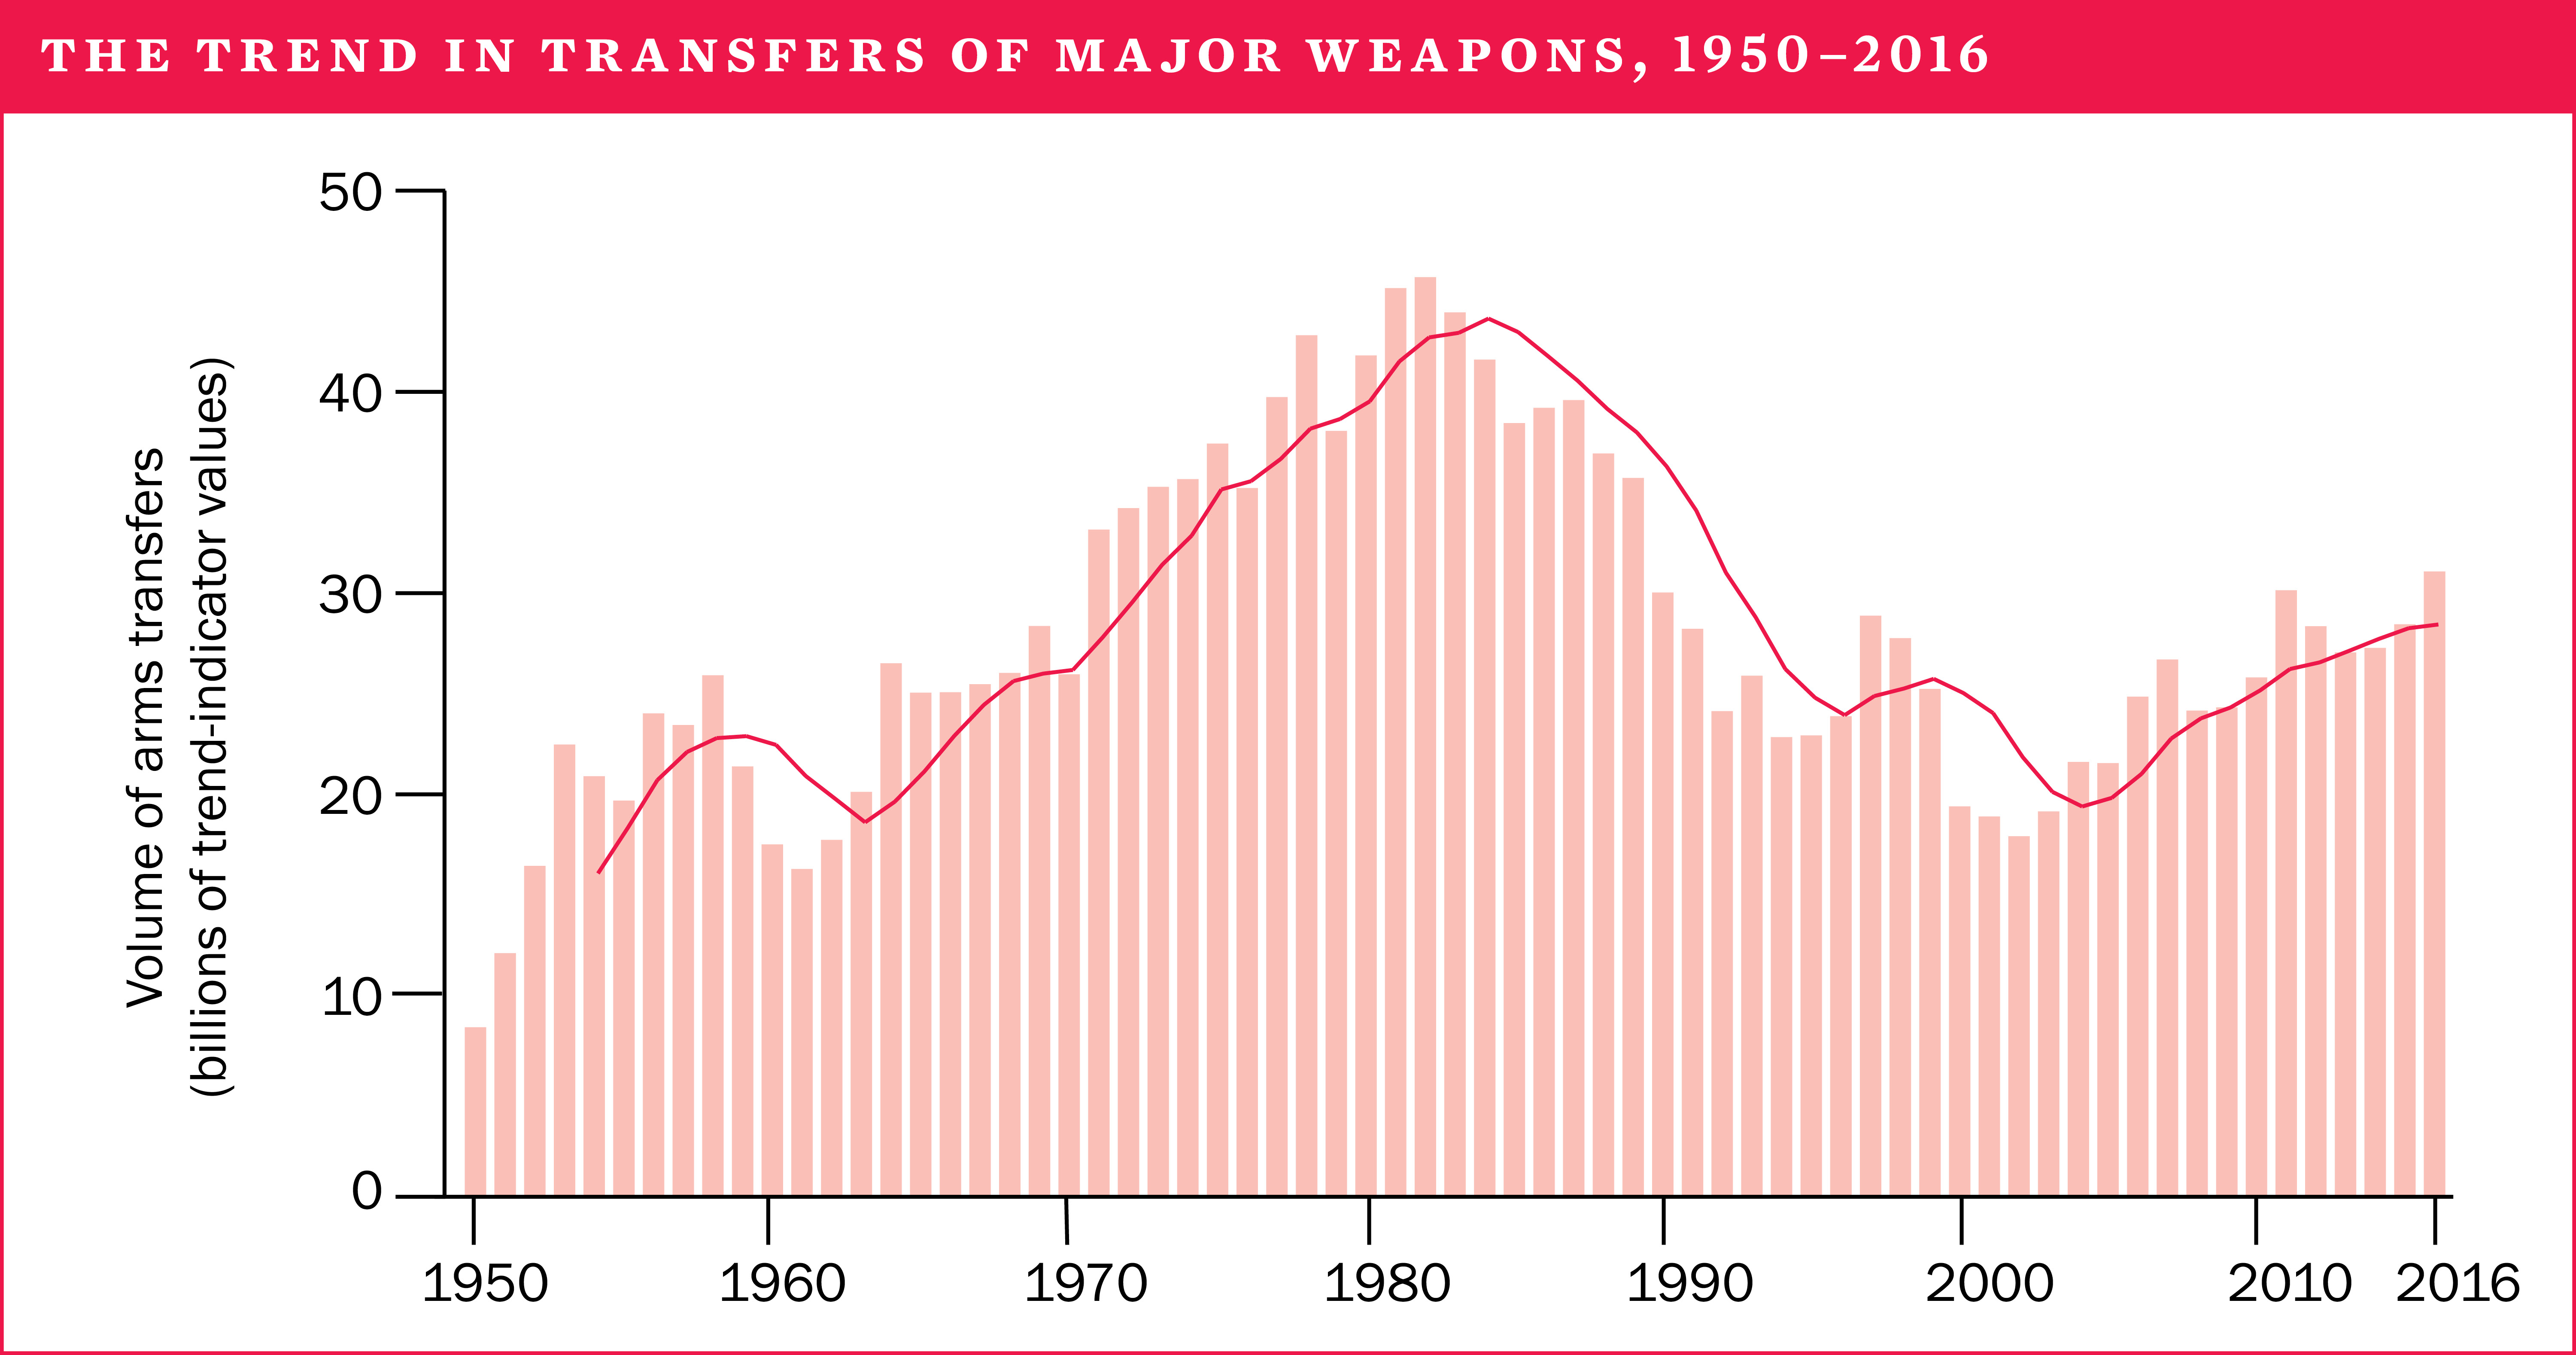 The trend in transfers of major weapons, 1950-2016